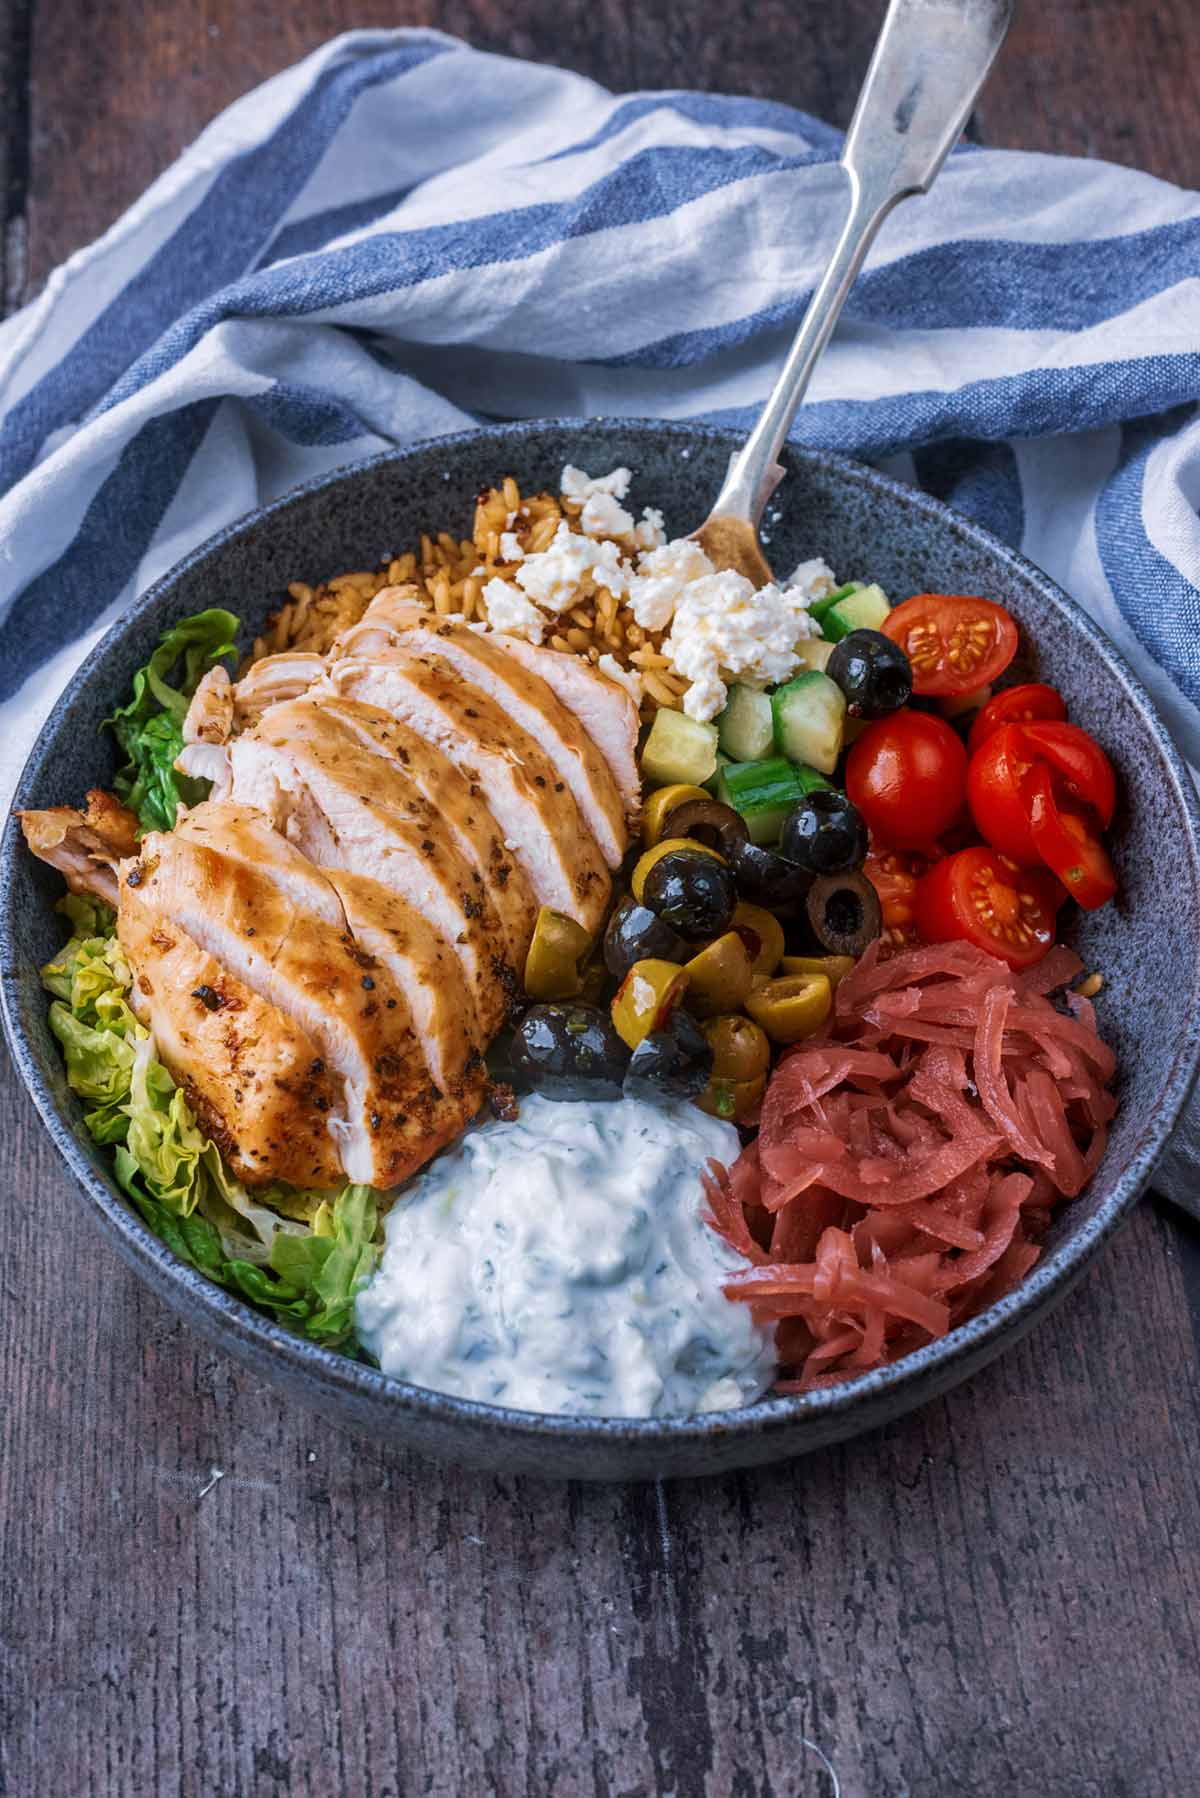 A bowl of sliced chicken and salad in front of a striped towel.